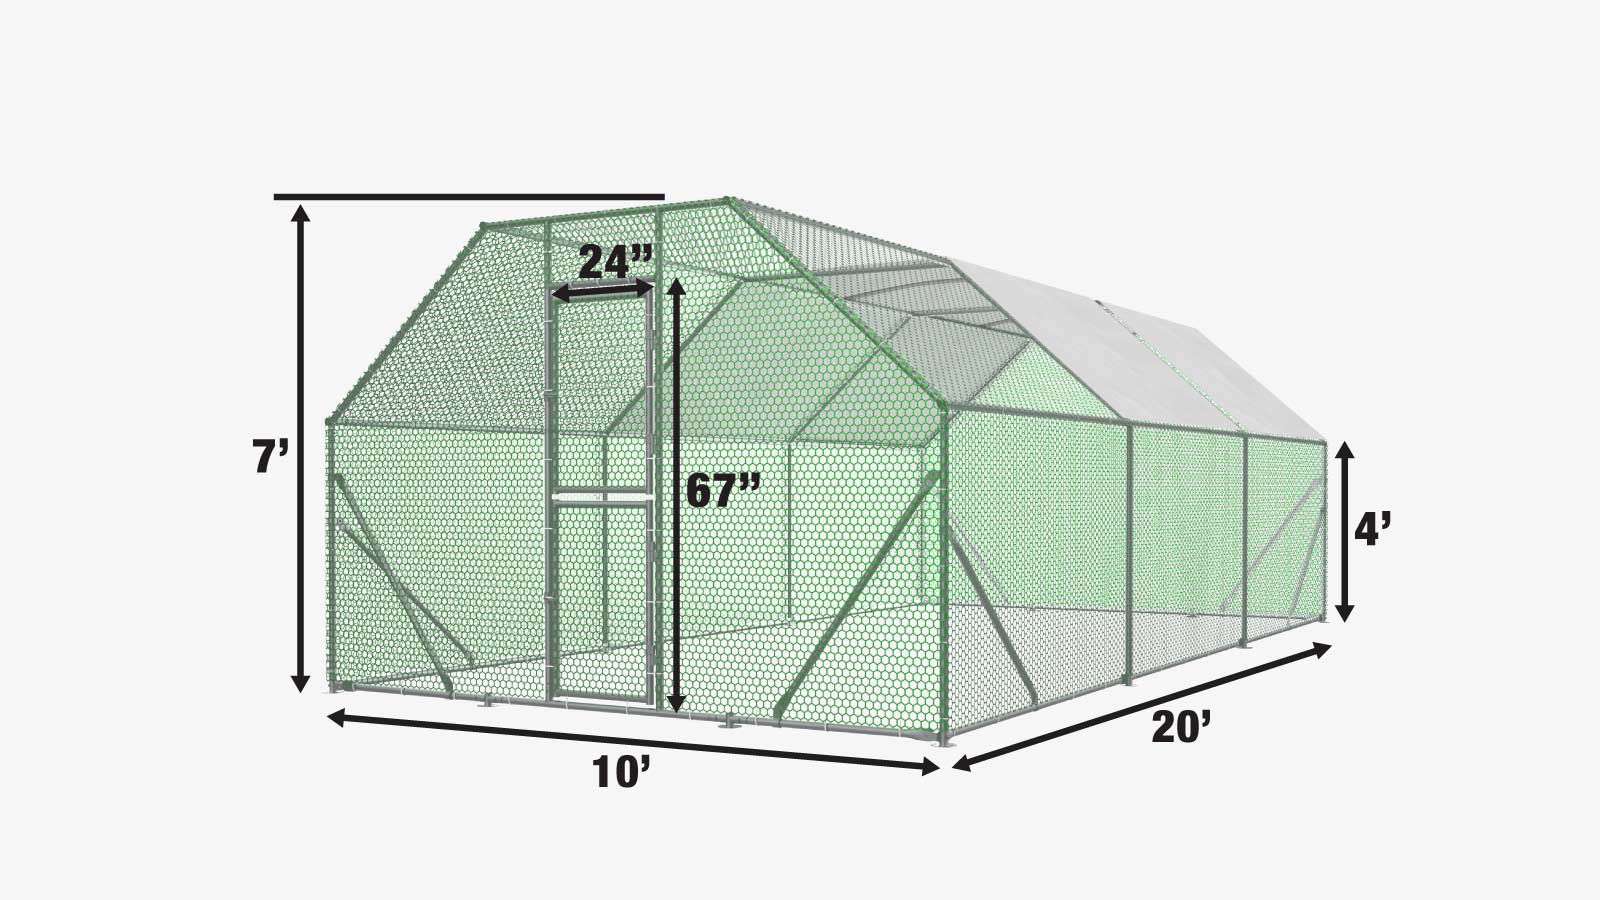 TMG Industrial 10' x 20' Wire Mesh Chicken Run Shelter Coop, Acier galvanisé, 200 Sq-Ft, Verrouillable Gate, PVC Coated Mesh, TMG-CRS1020-specifications-image